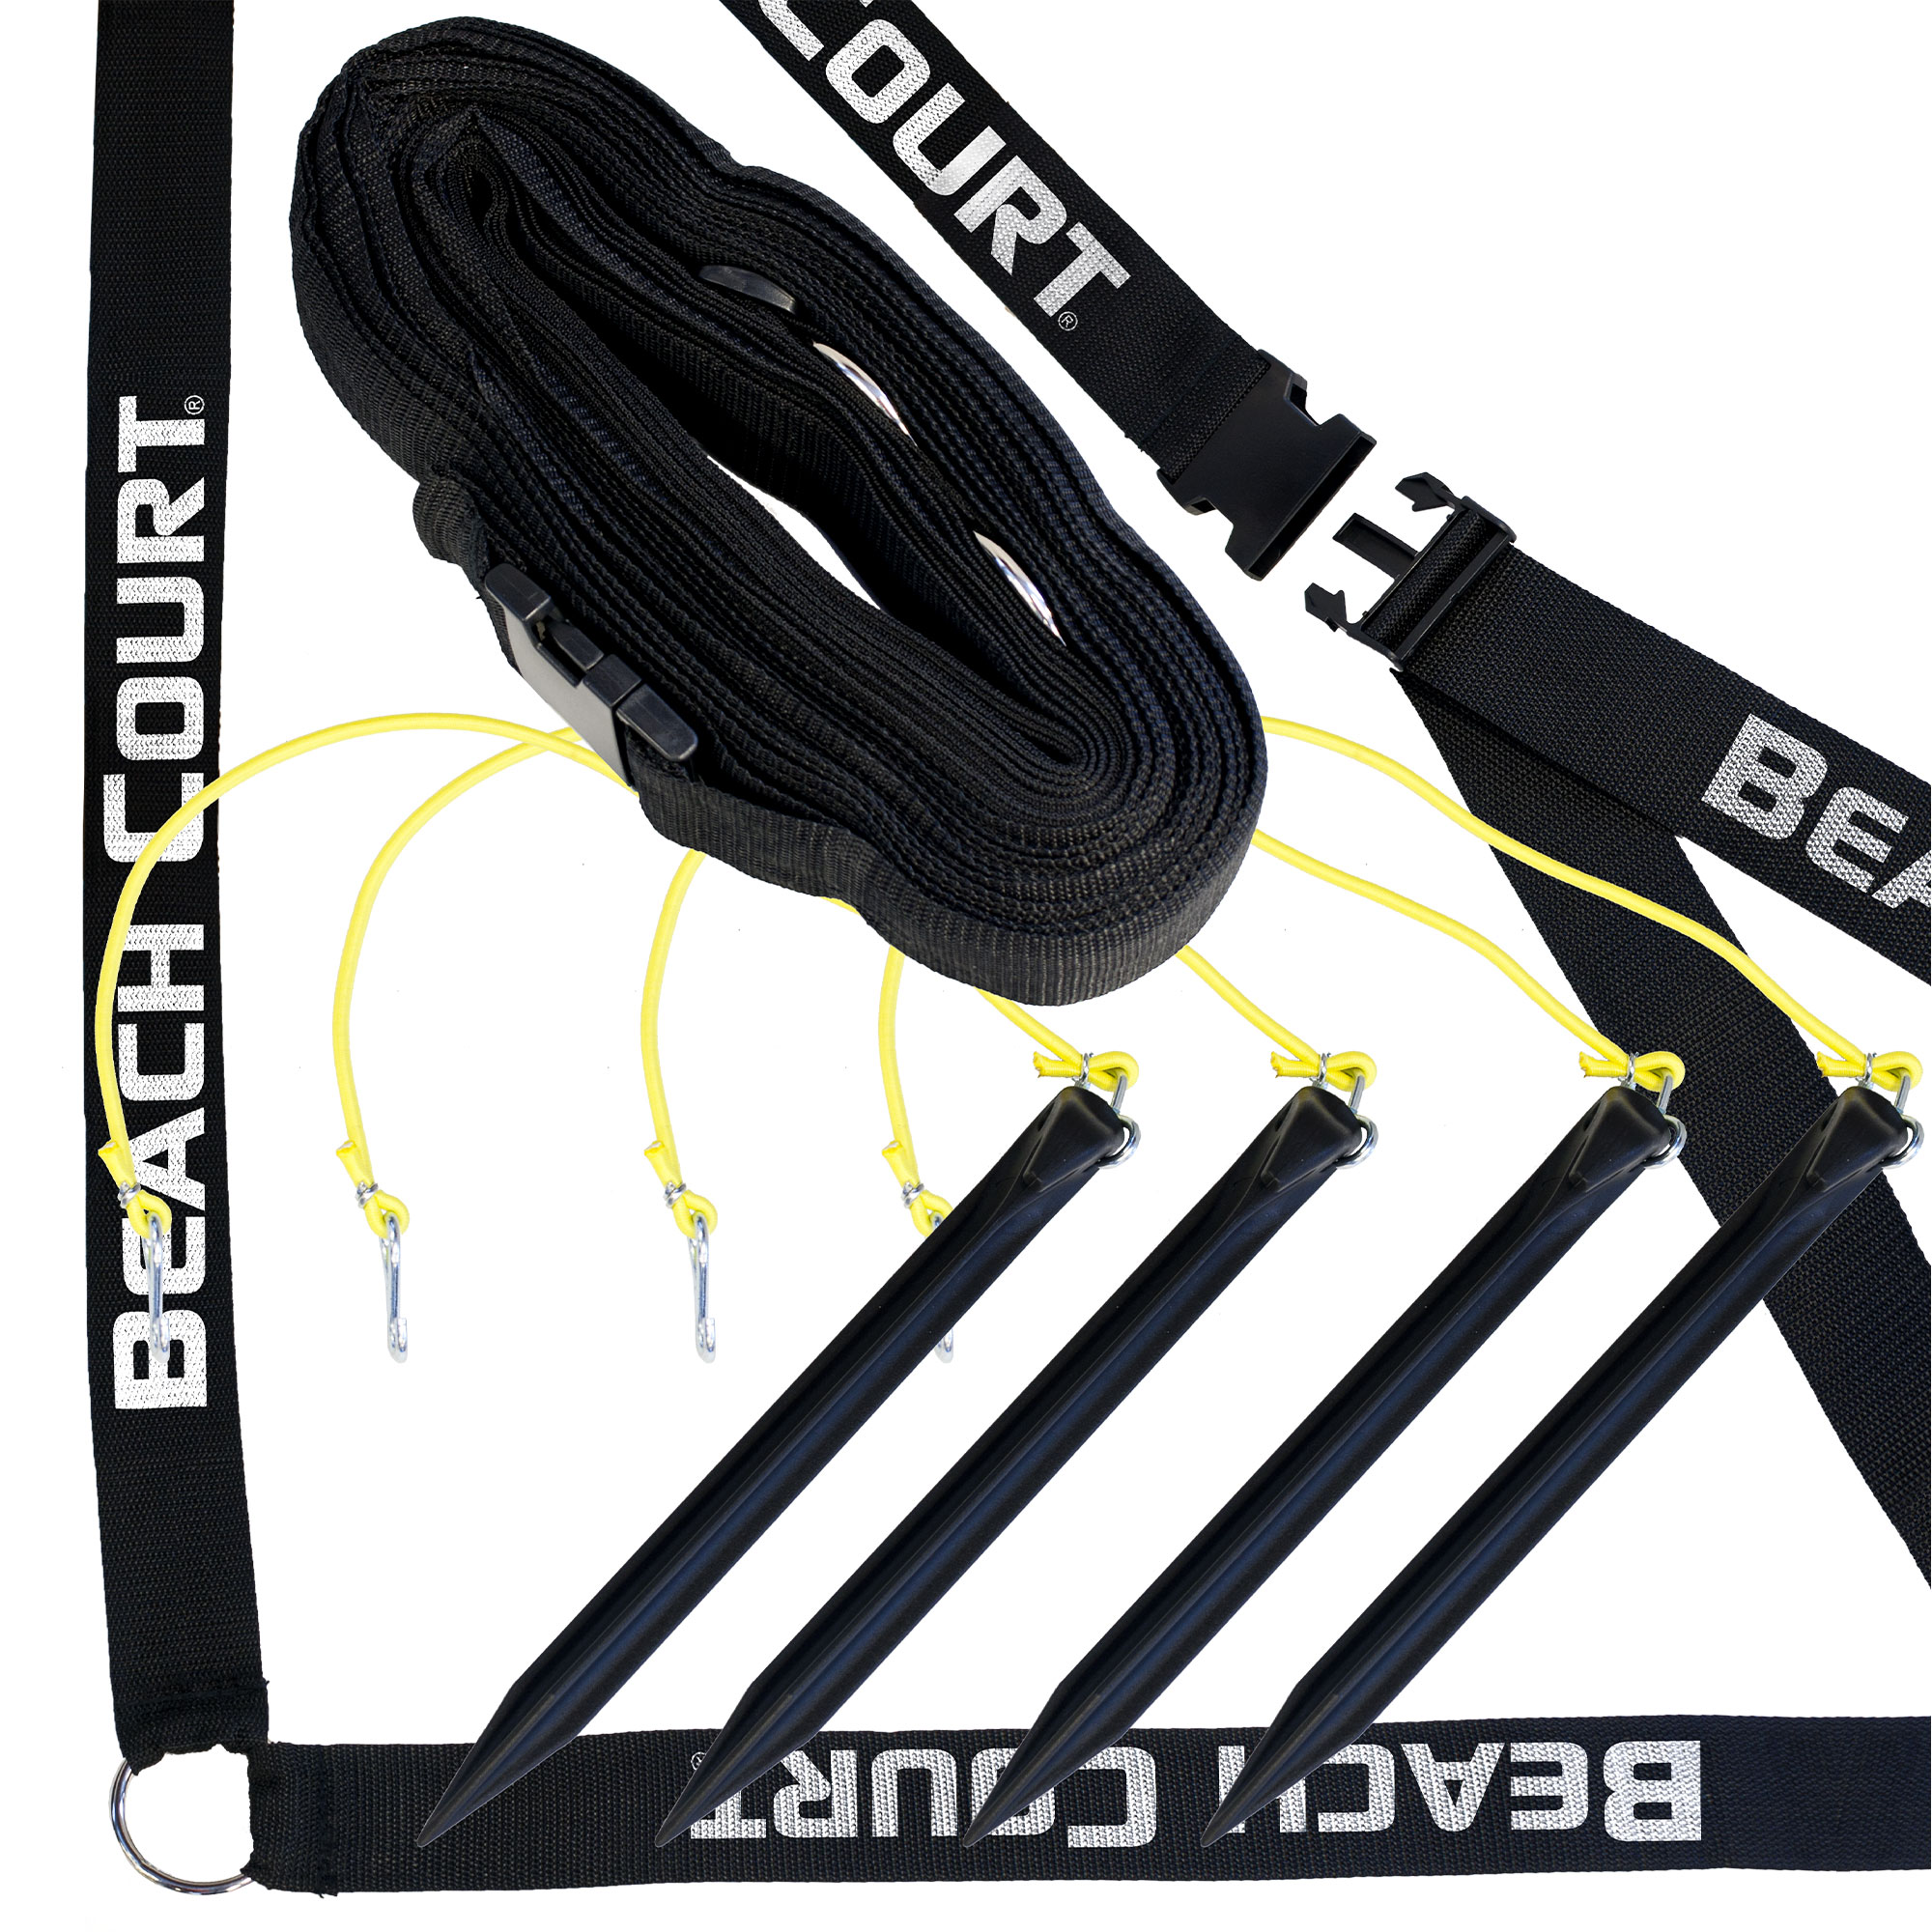 BeachCourt – 2 inch PRO Doubles, Short Court Volleyball with printed Black Webbing Boundary (8m x 16m)